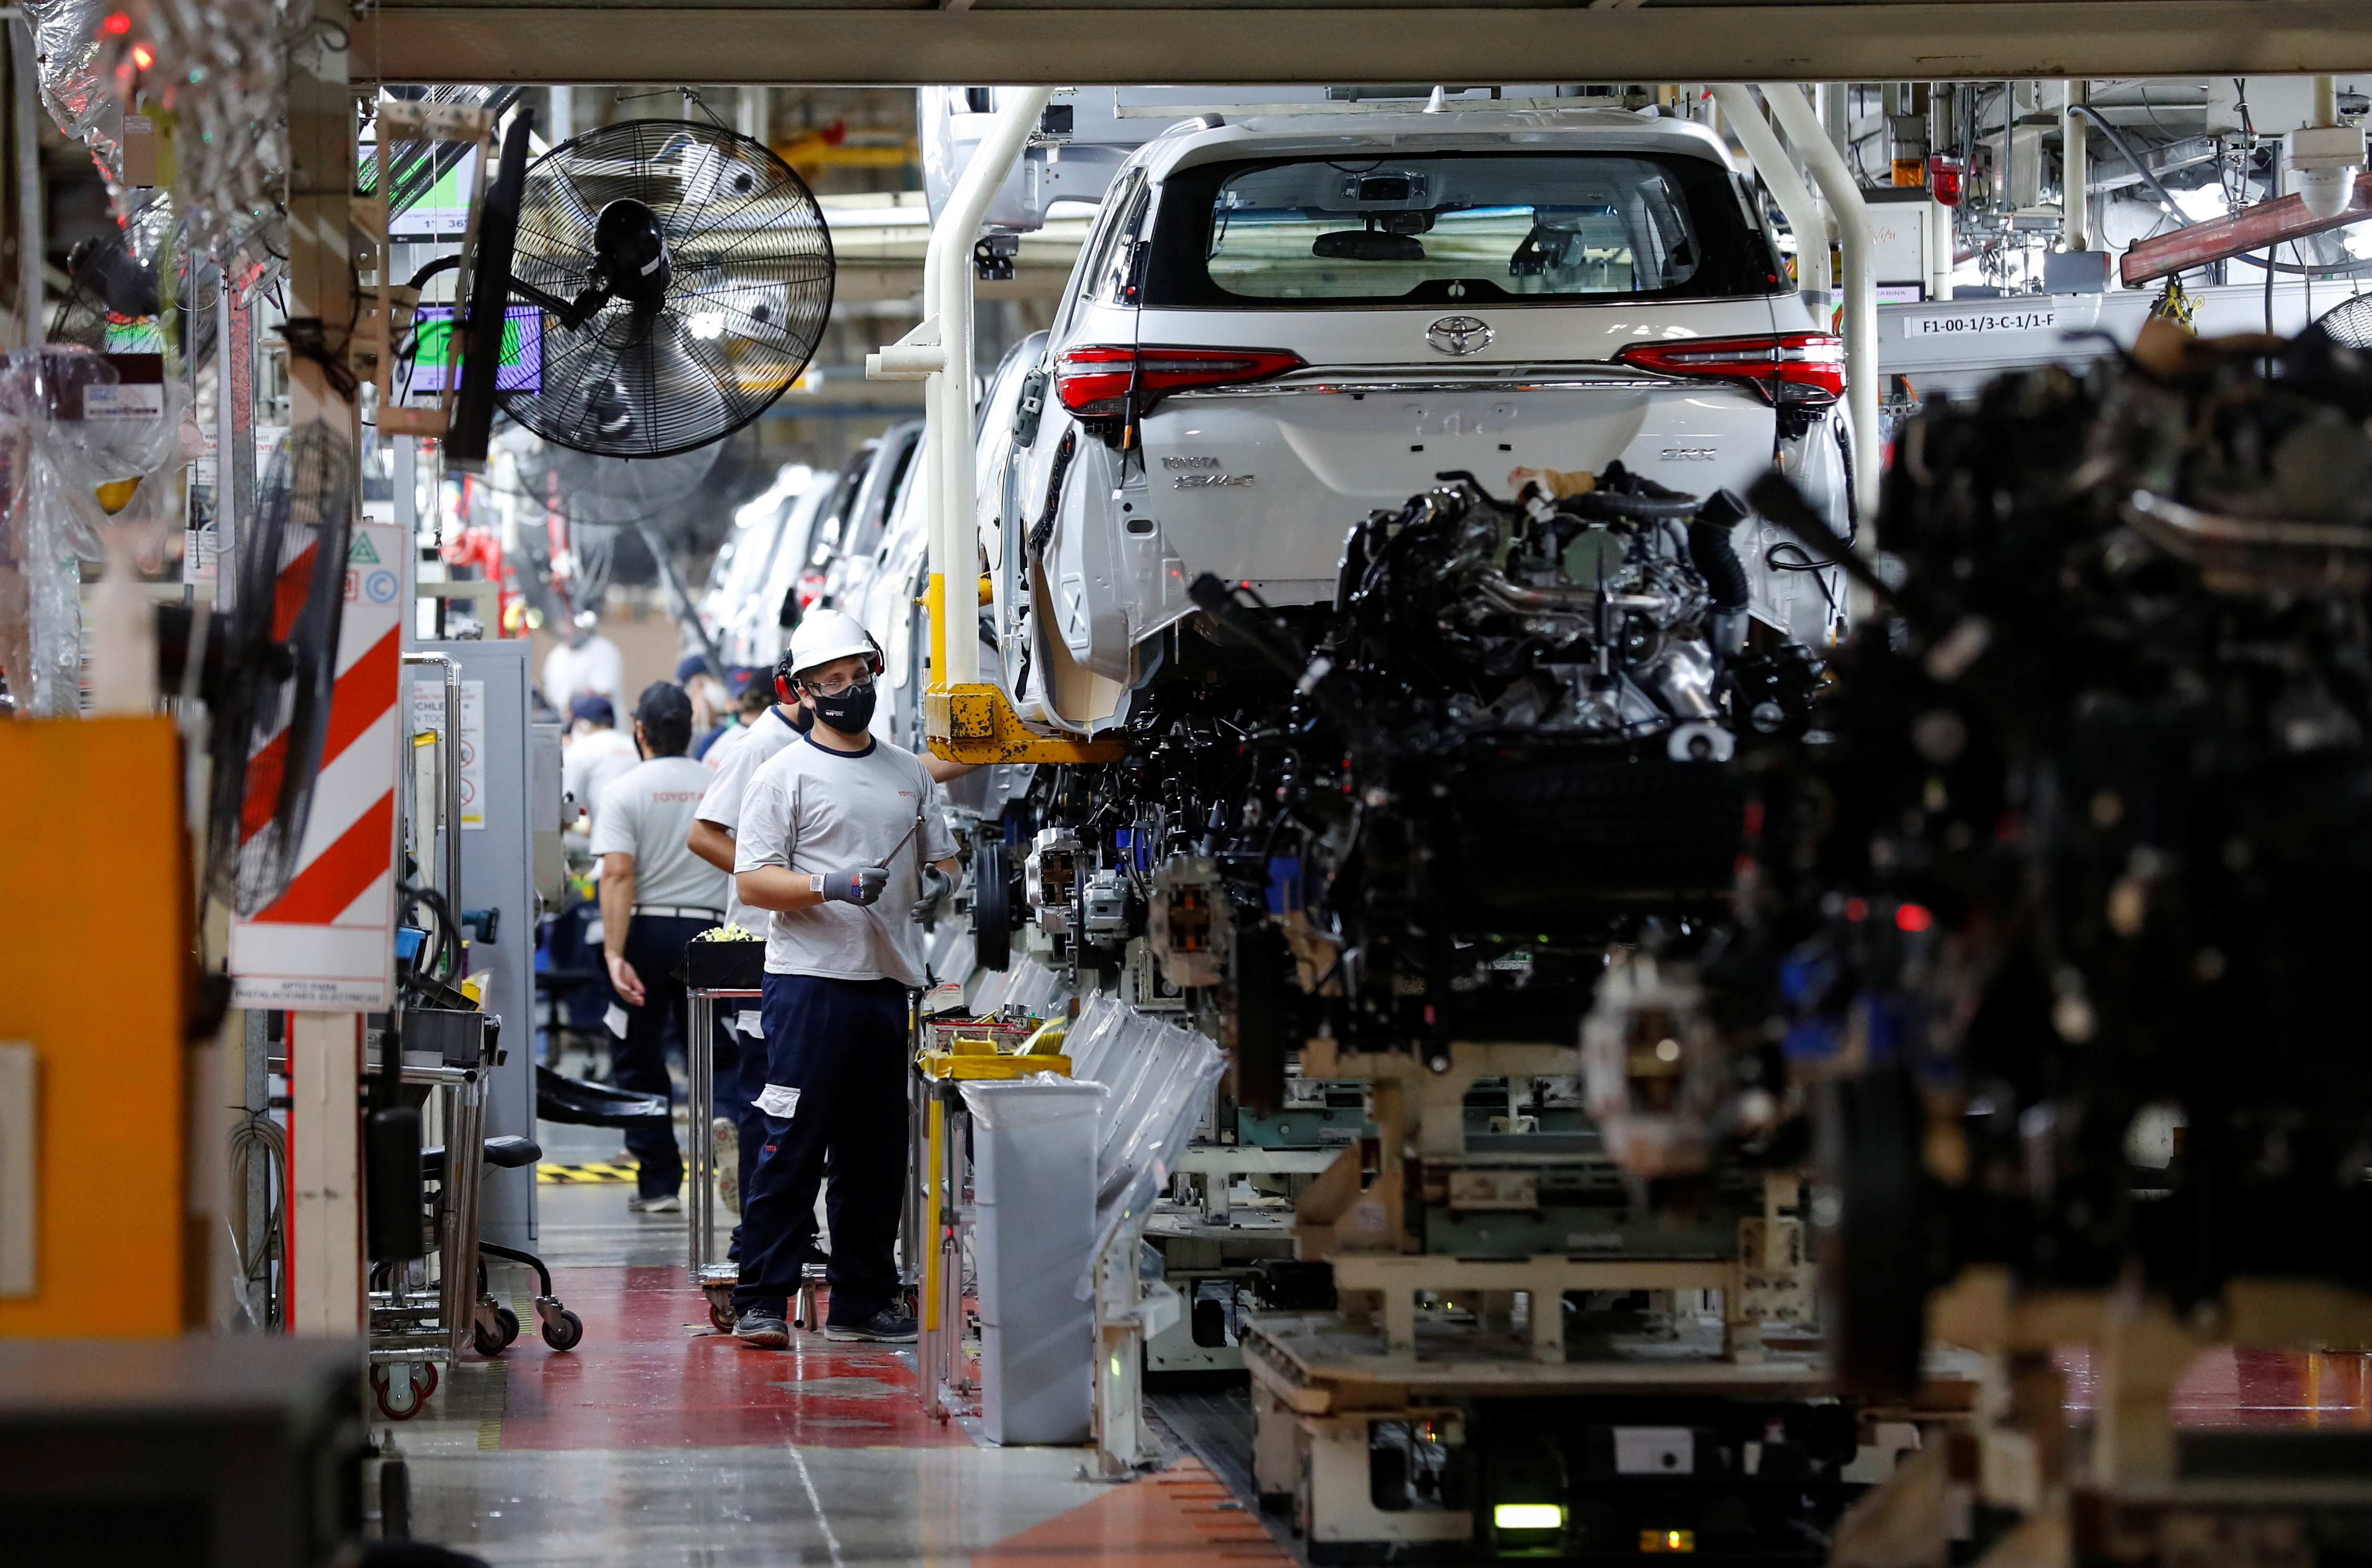 Employees work at the Toyota assembly plant in Zarate, on the outskirts of Buenos Aires, Argentina March 15, 2021. REUTERS/Agustin Marcarian